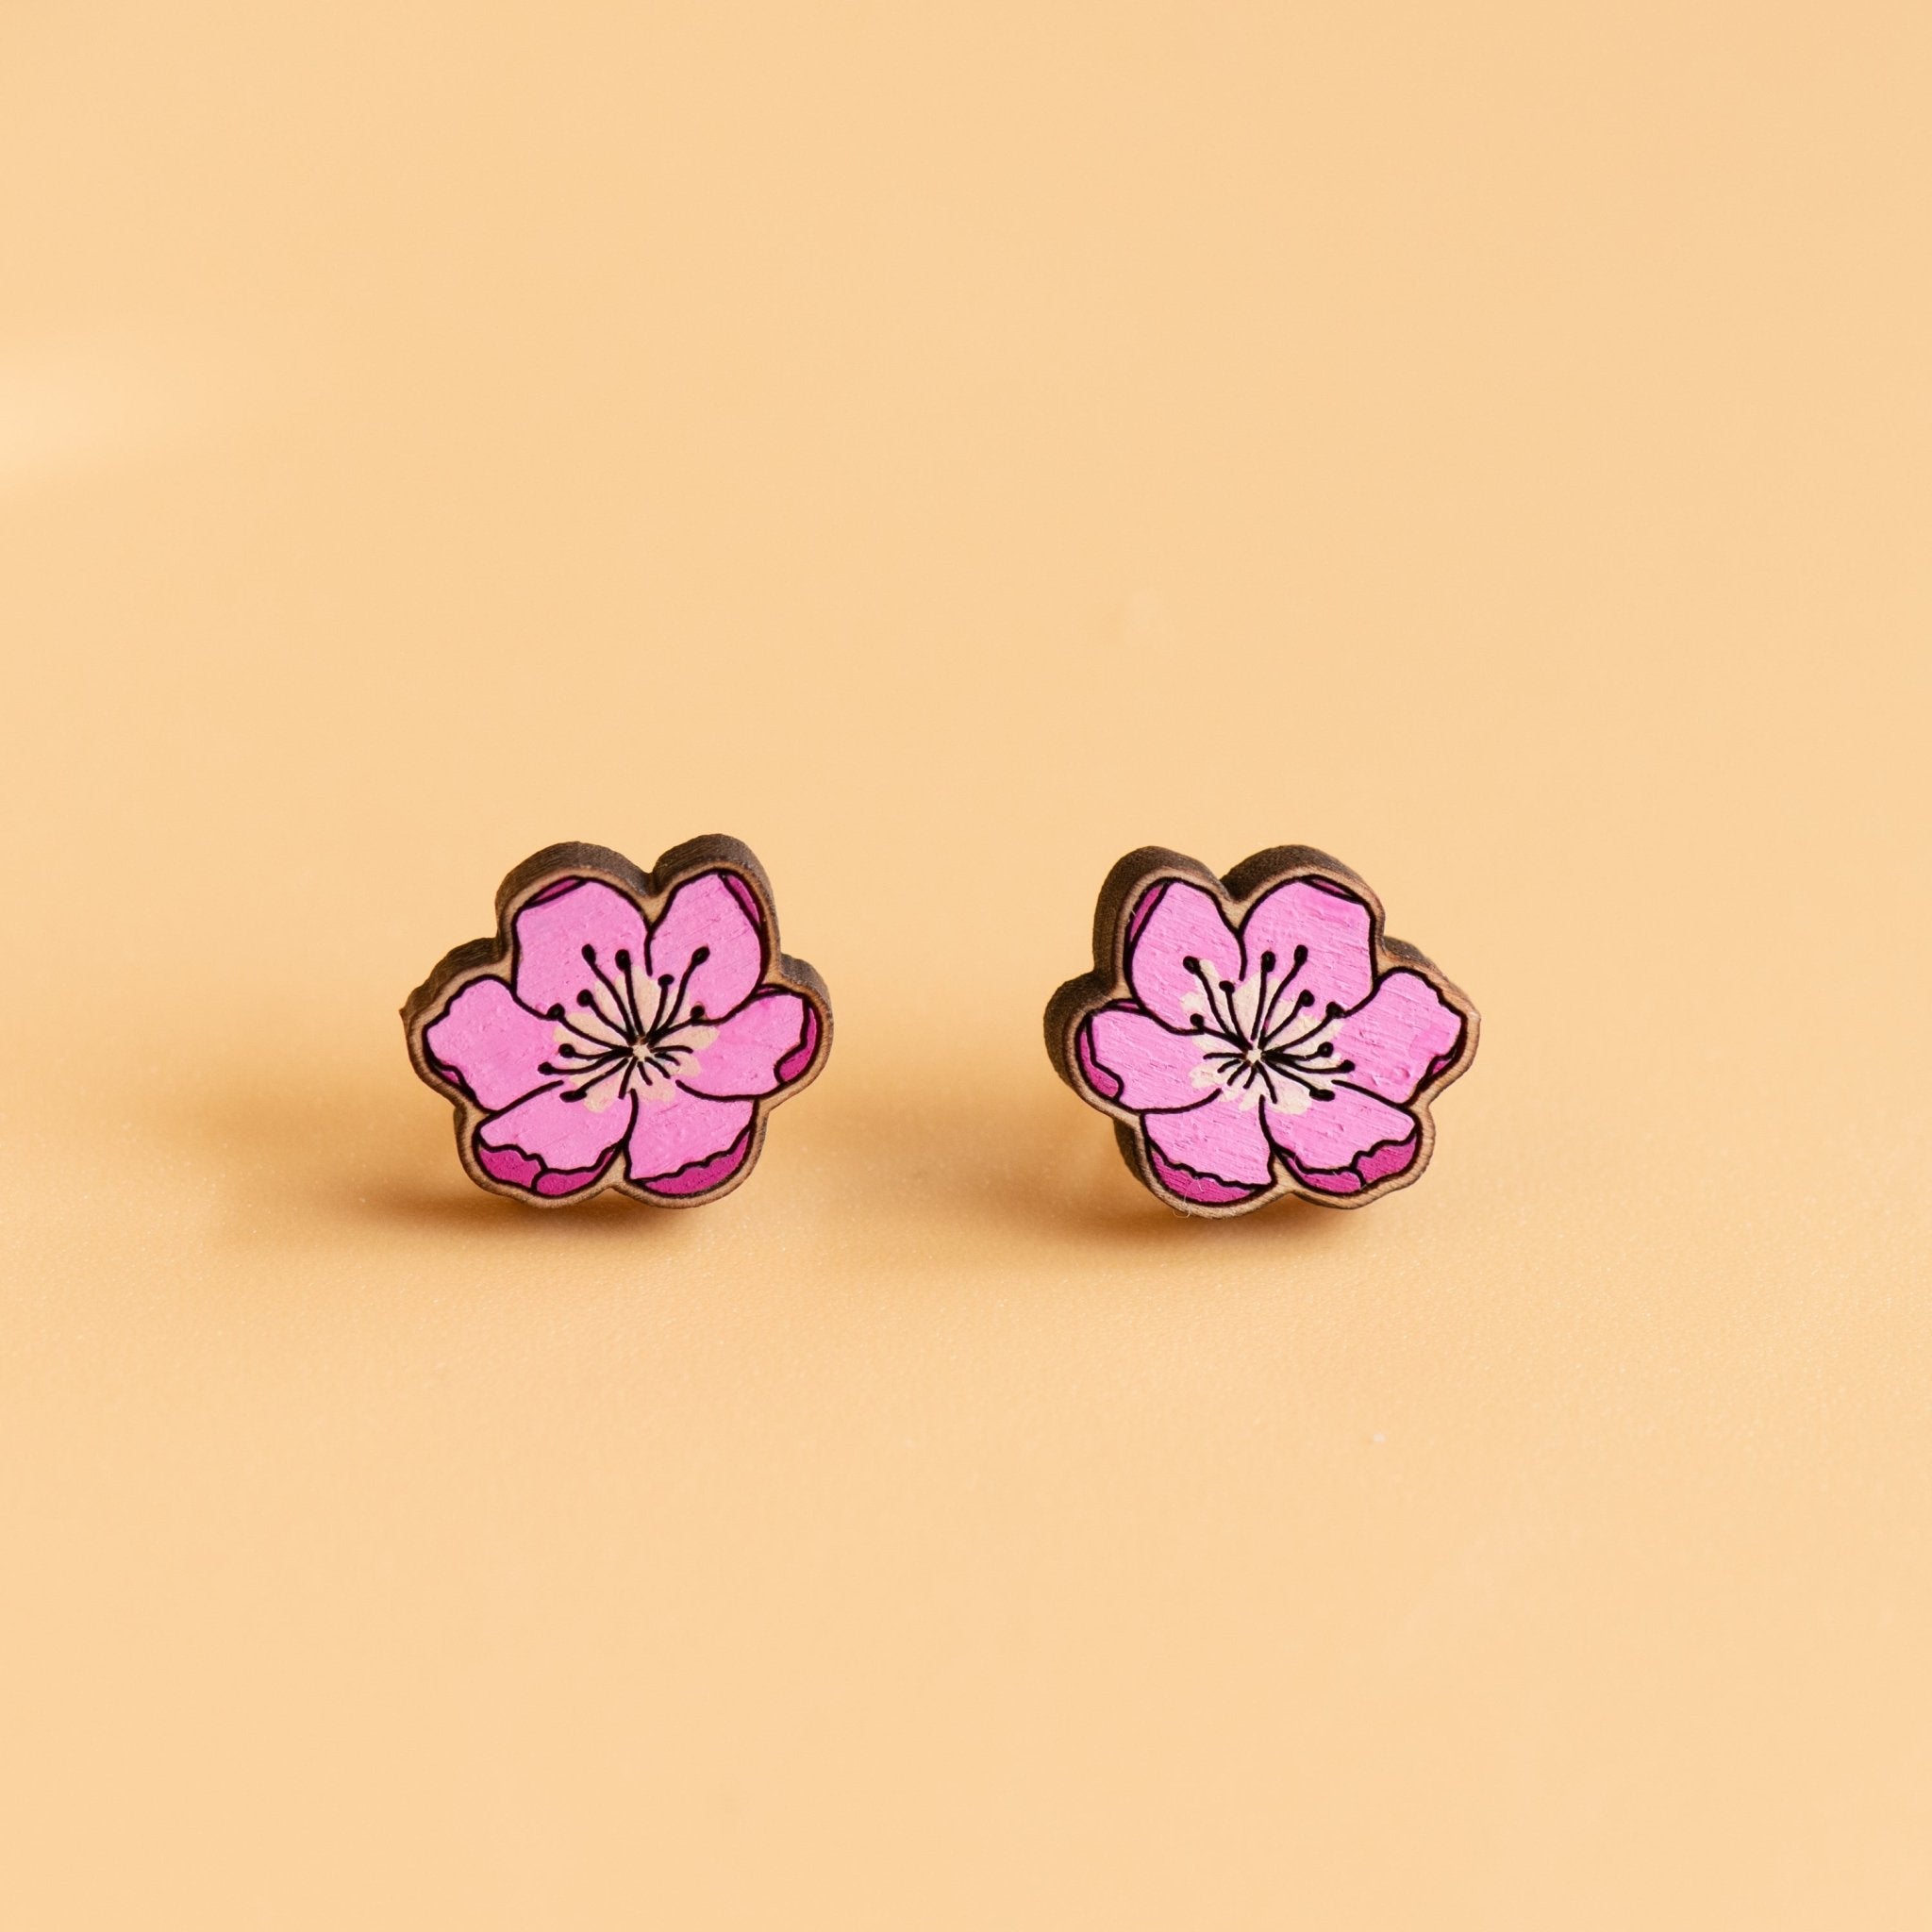 Hand-painted Cherry Blossom Flower Cherry Wood Stud Earrings - PEO14074 - Robin Valley Official Store